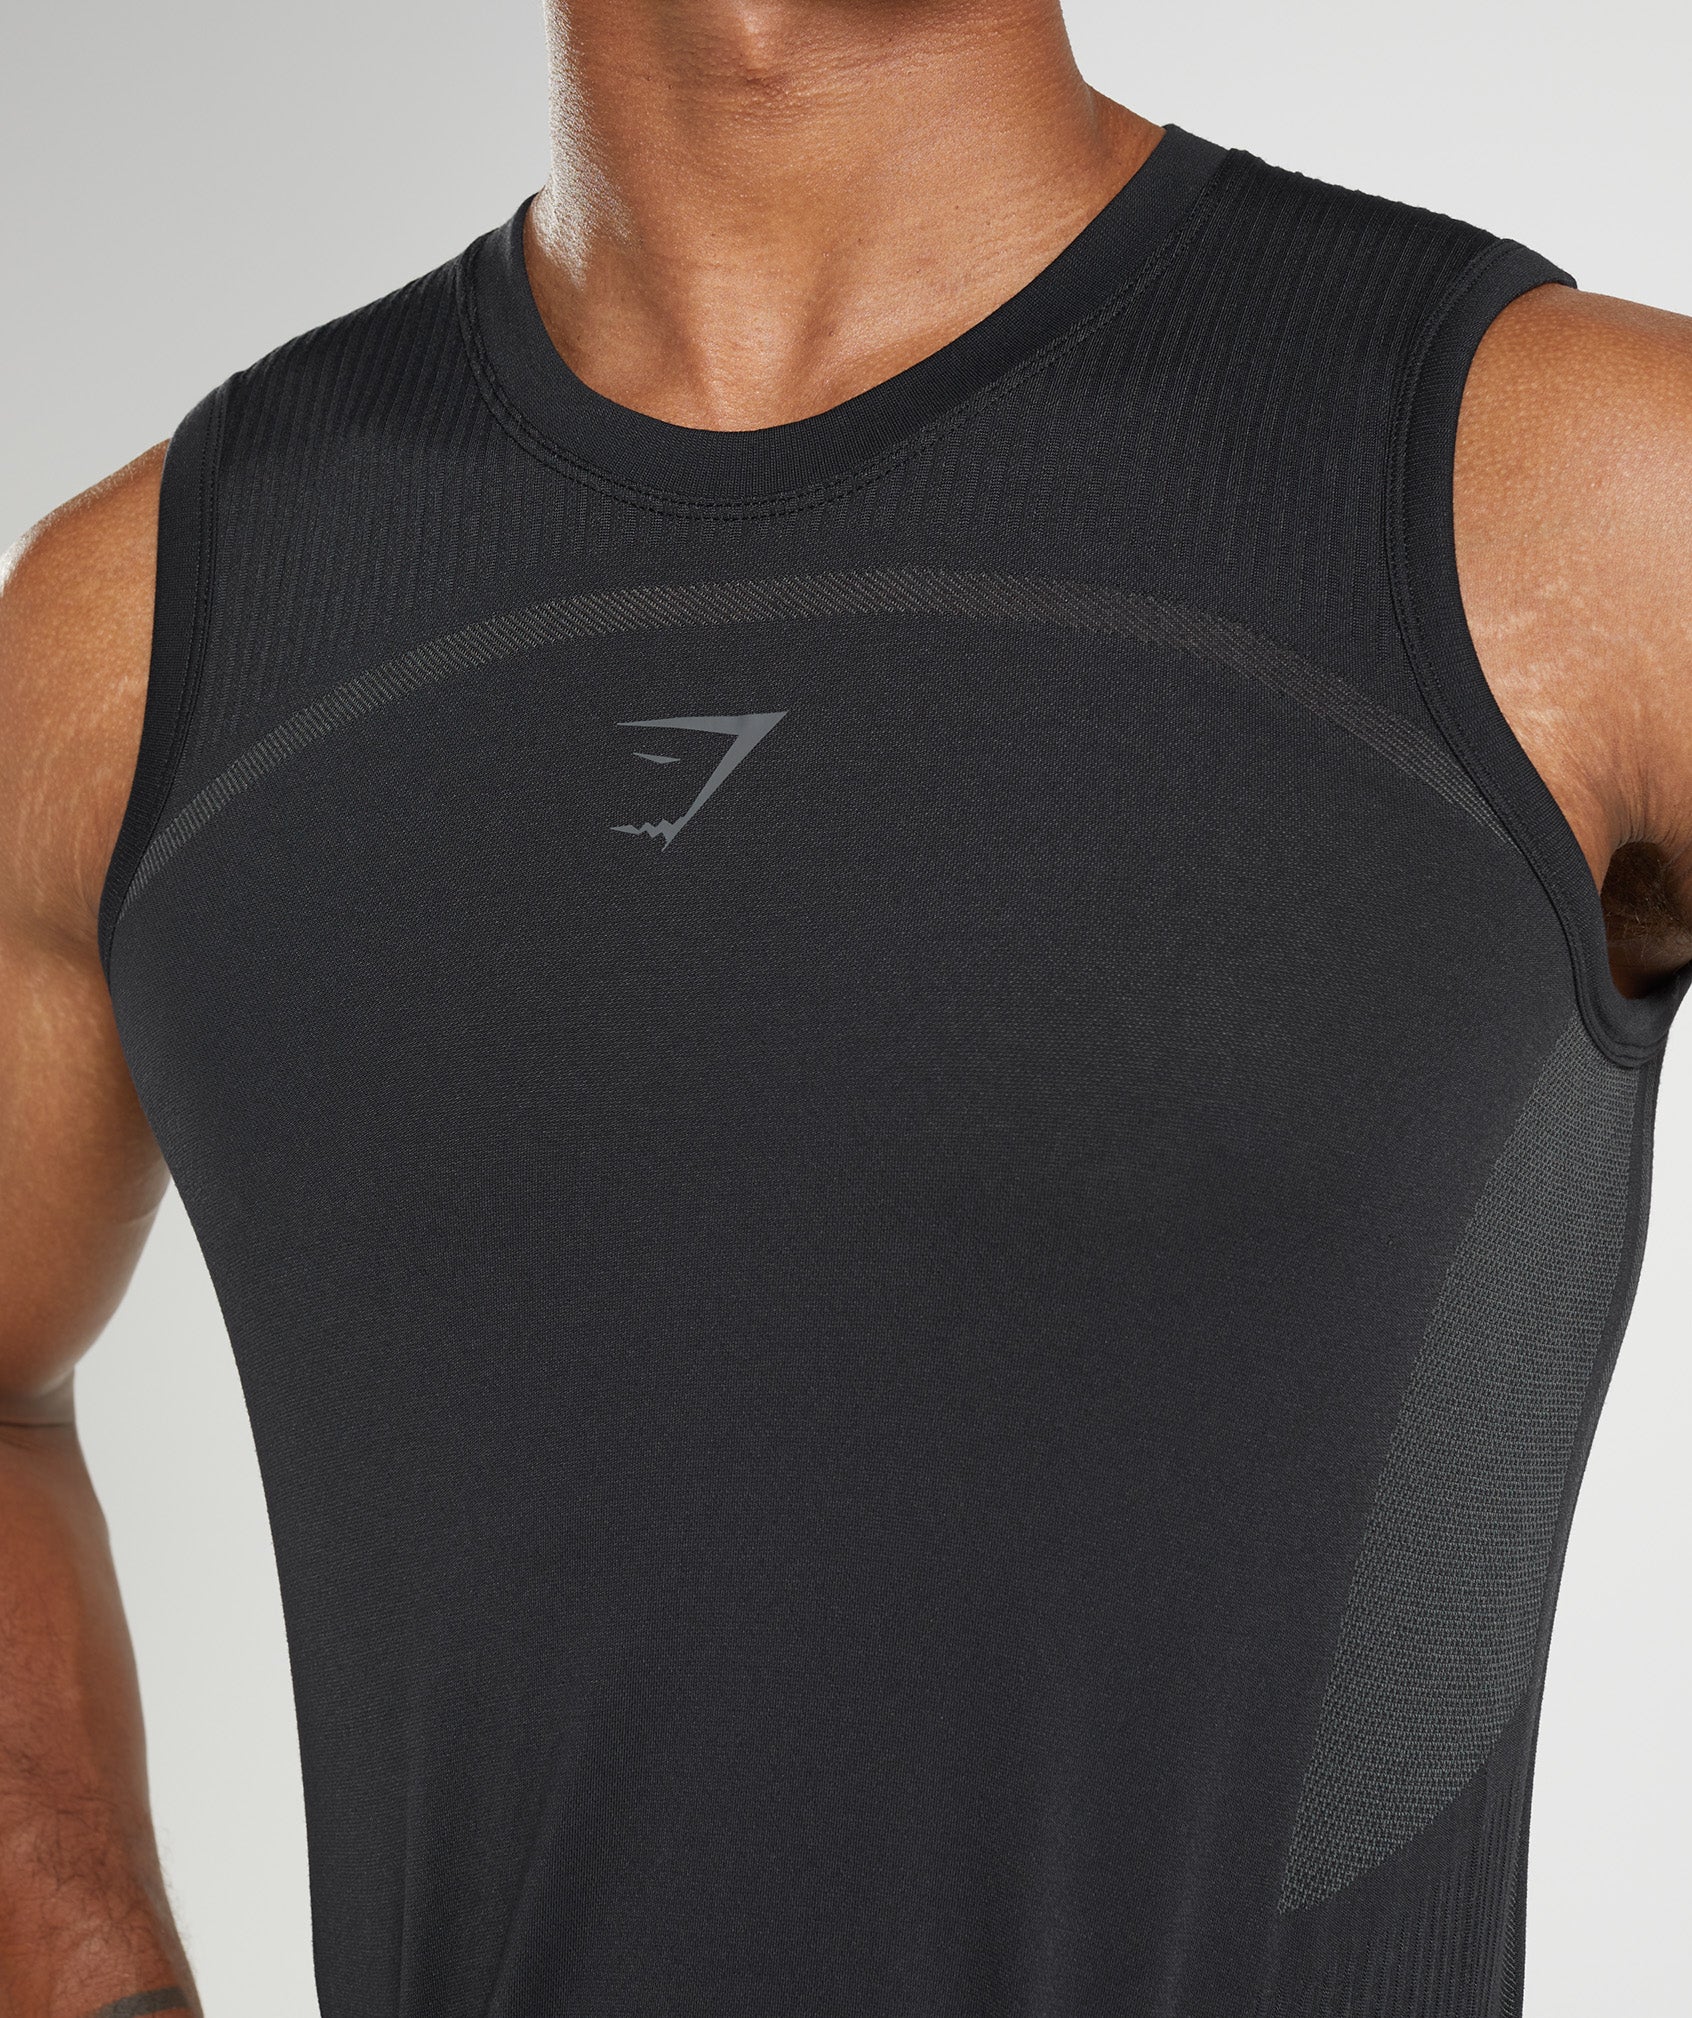 315 Seamless Tank in Black/Charcoal Grey - view 6